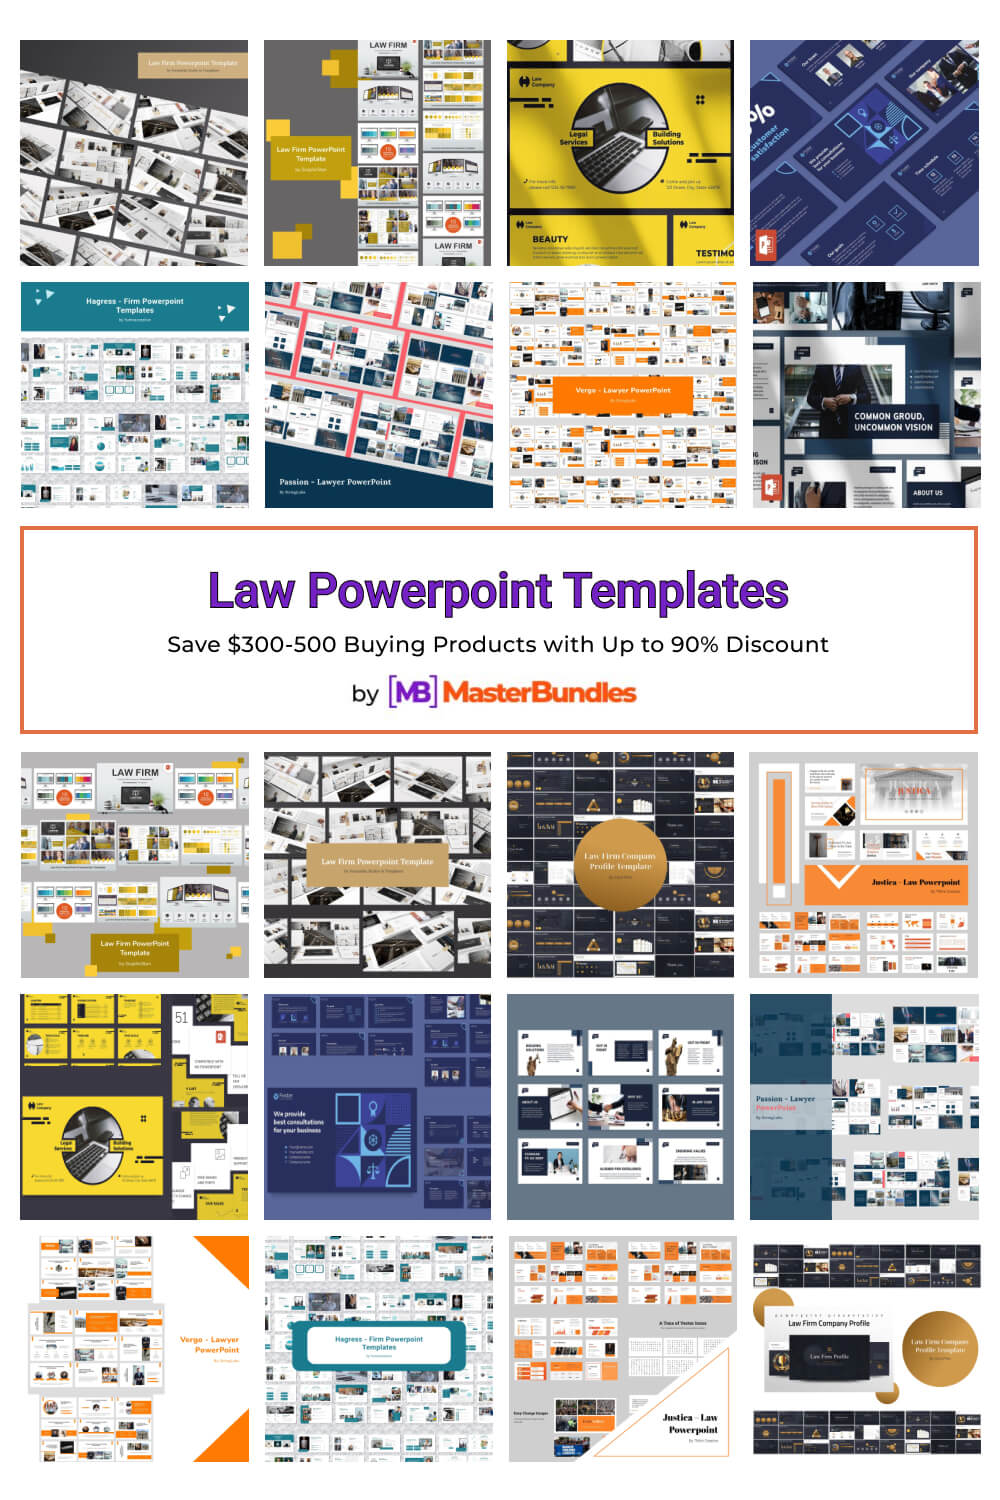 law powerpoint templates pinterest image.